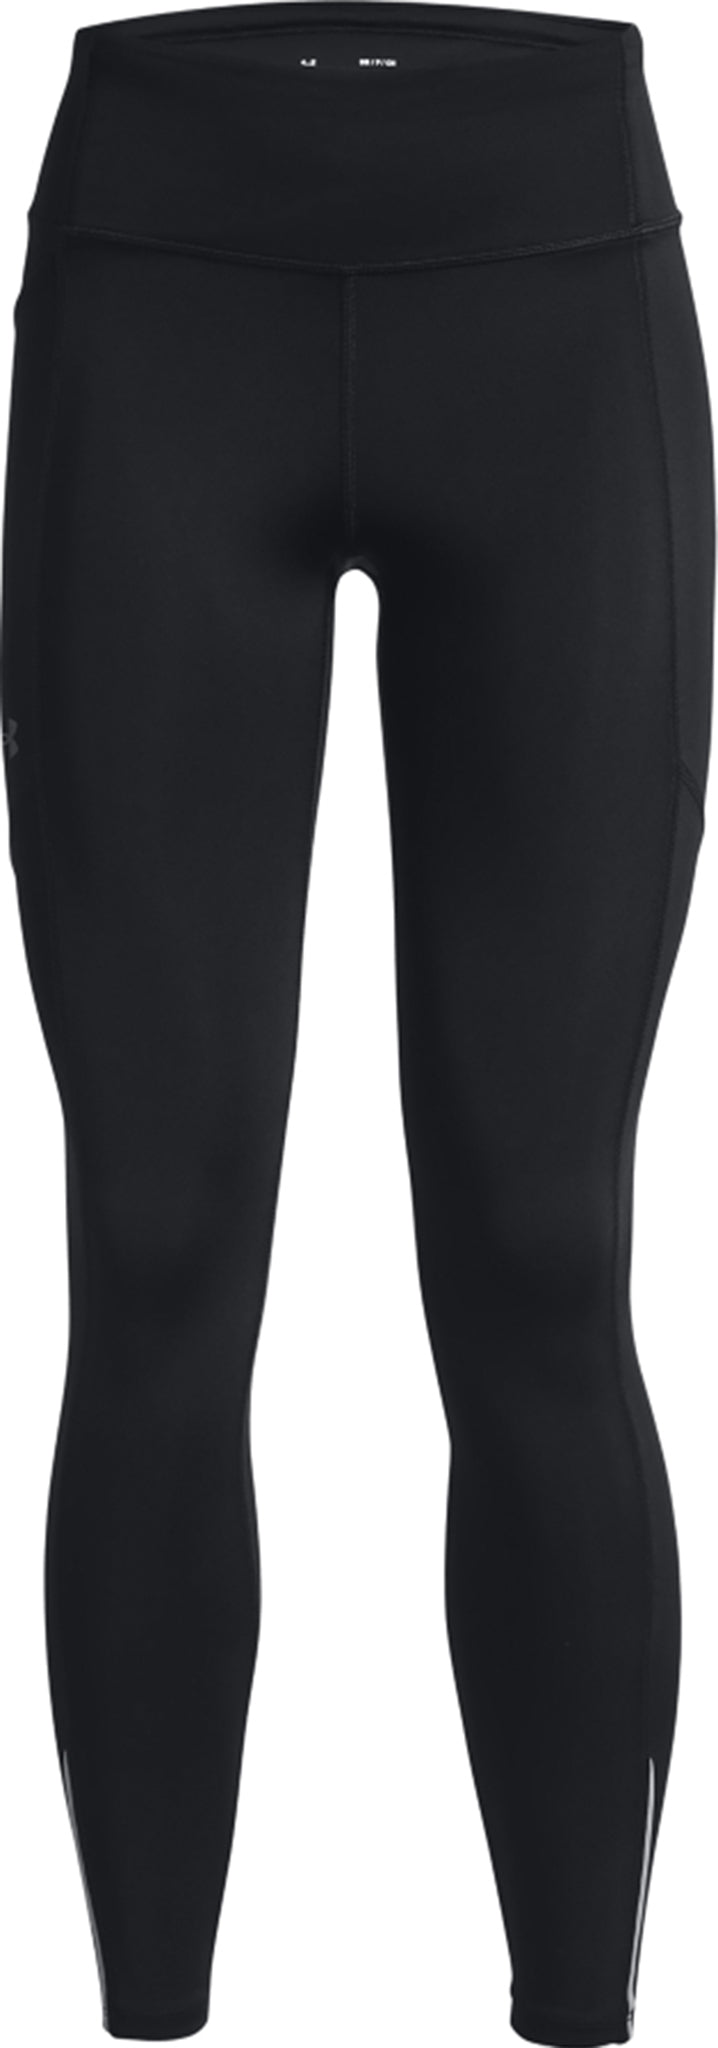 Women's Legging Under Armour Fly Fast 3.0 Ankle - Leggings / Tights - The  Stockings - Womens Clothing